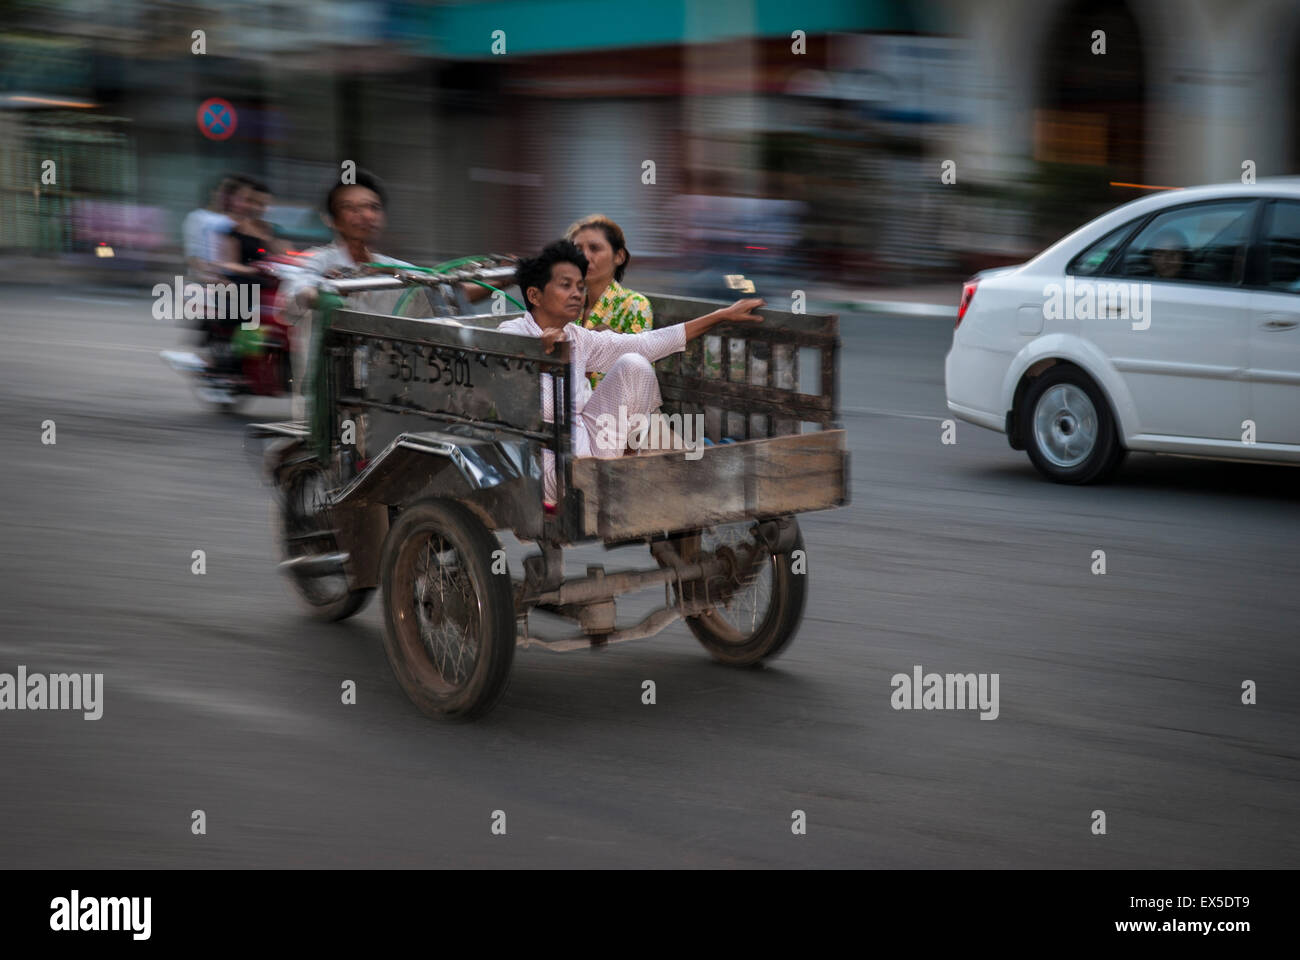 HO CHI MINH CITY/VIETNAM - 18TH MARCH Vietnamese family speed past on a trike in Saigon Stock Photo